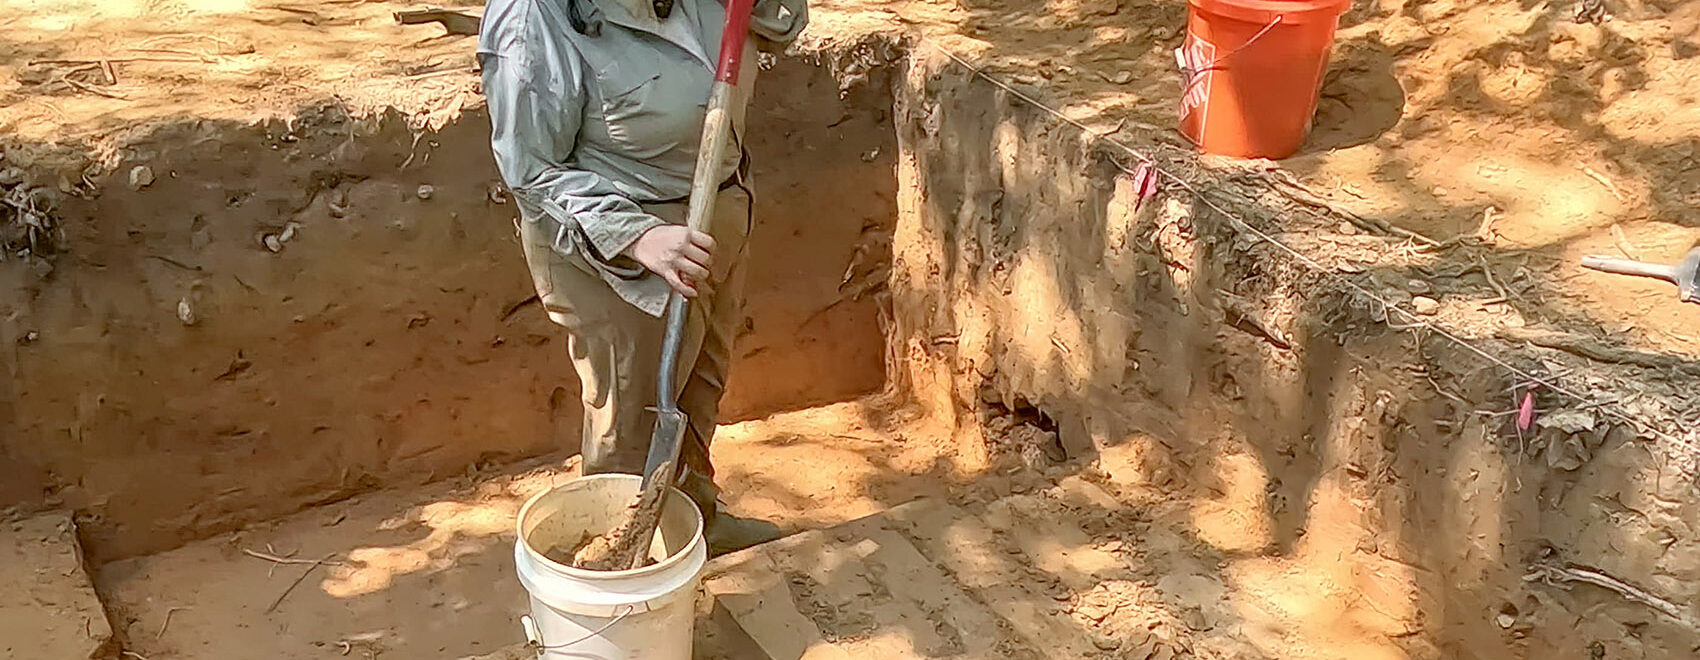 woman wearing hat with shovel and bucket in archealogy dig